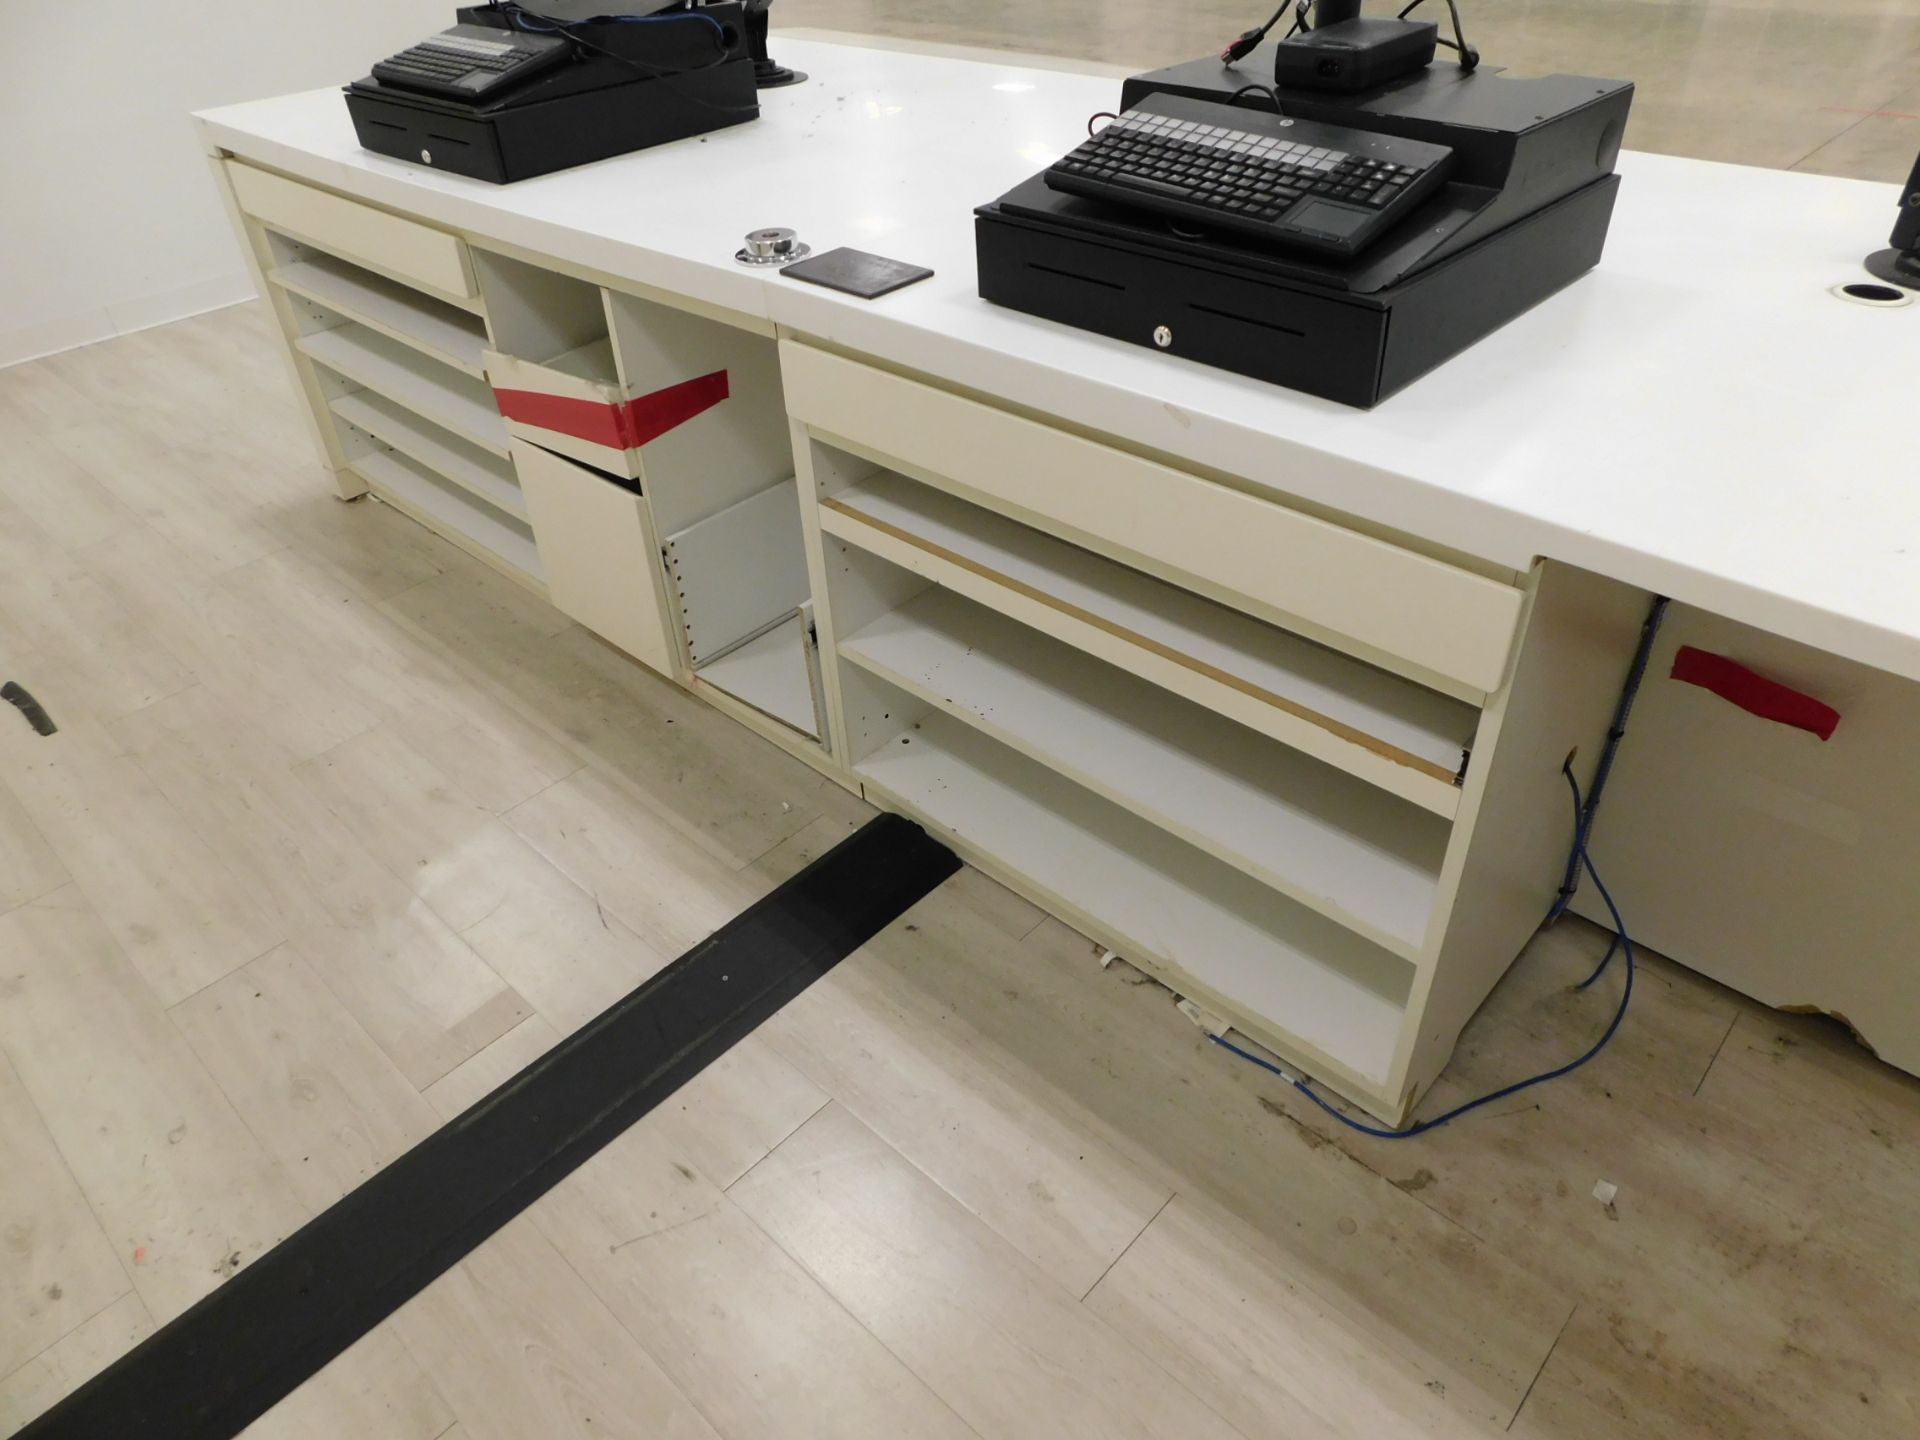 Cashier Workstations with Epson Printers - Image 5 of 5